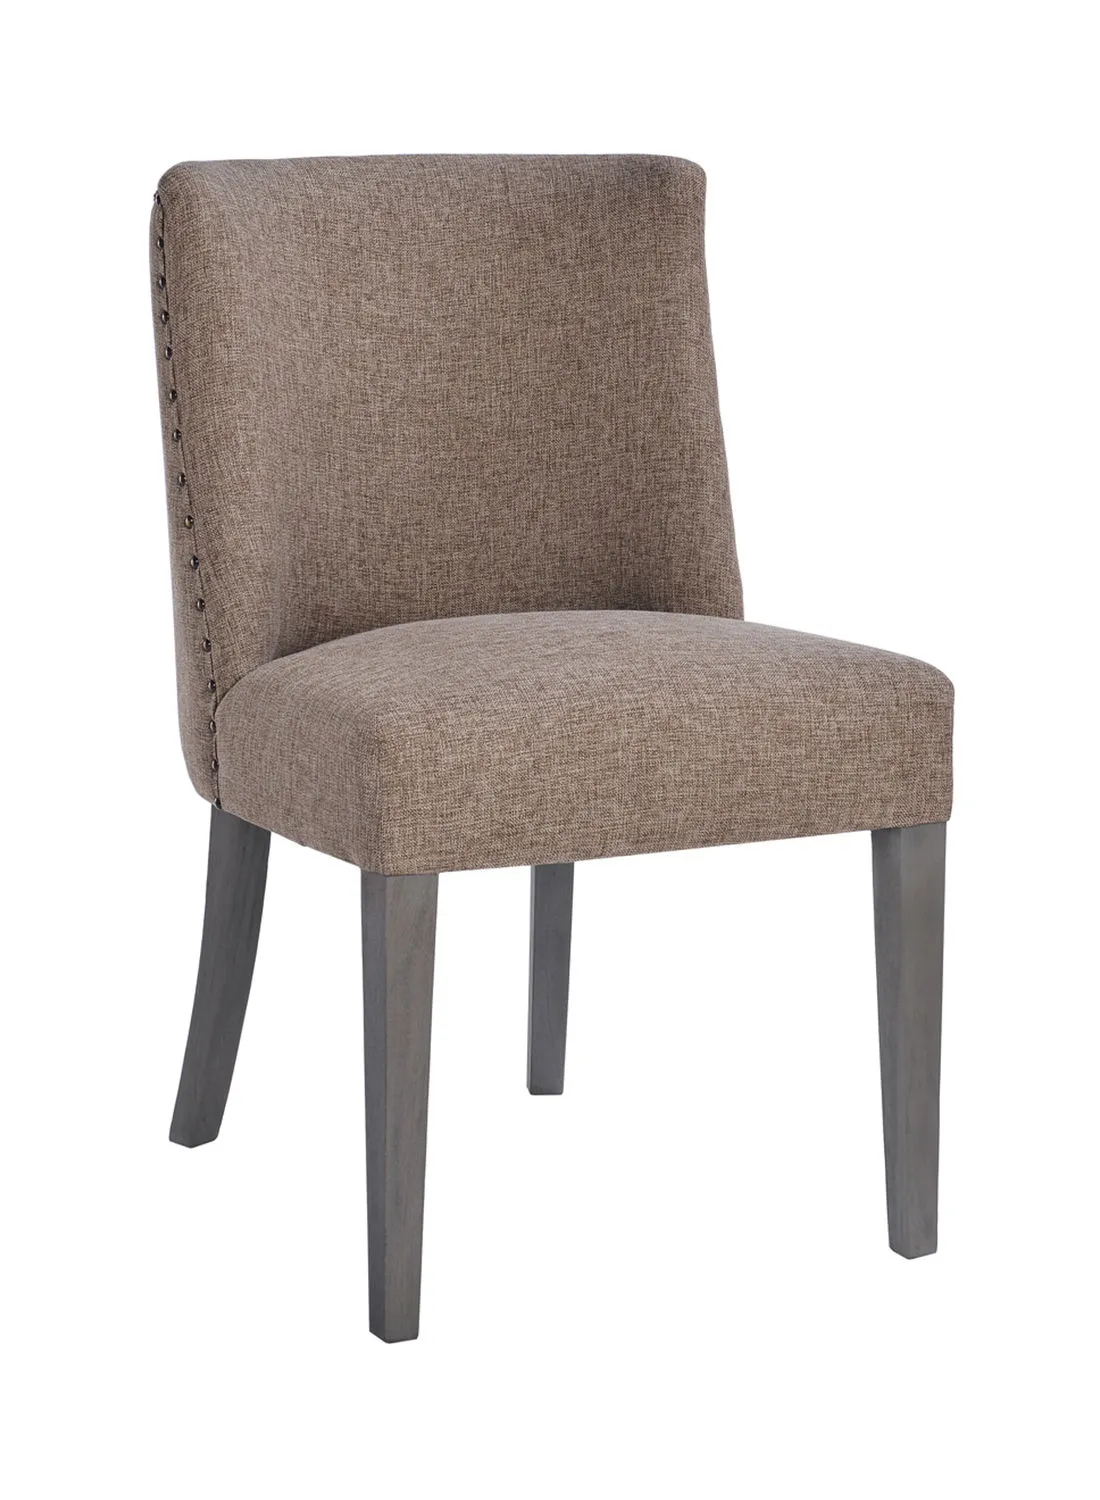 ebb & flow Dining Chair Luxurious - In Oak Wooden Chair Size 49 X 59 X 88